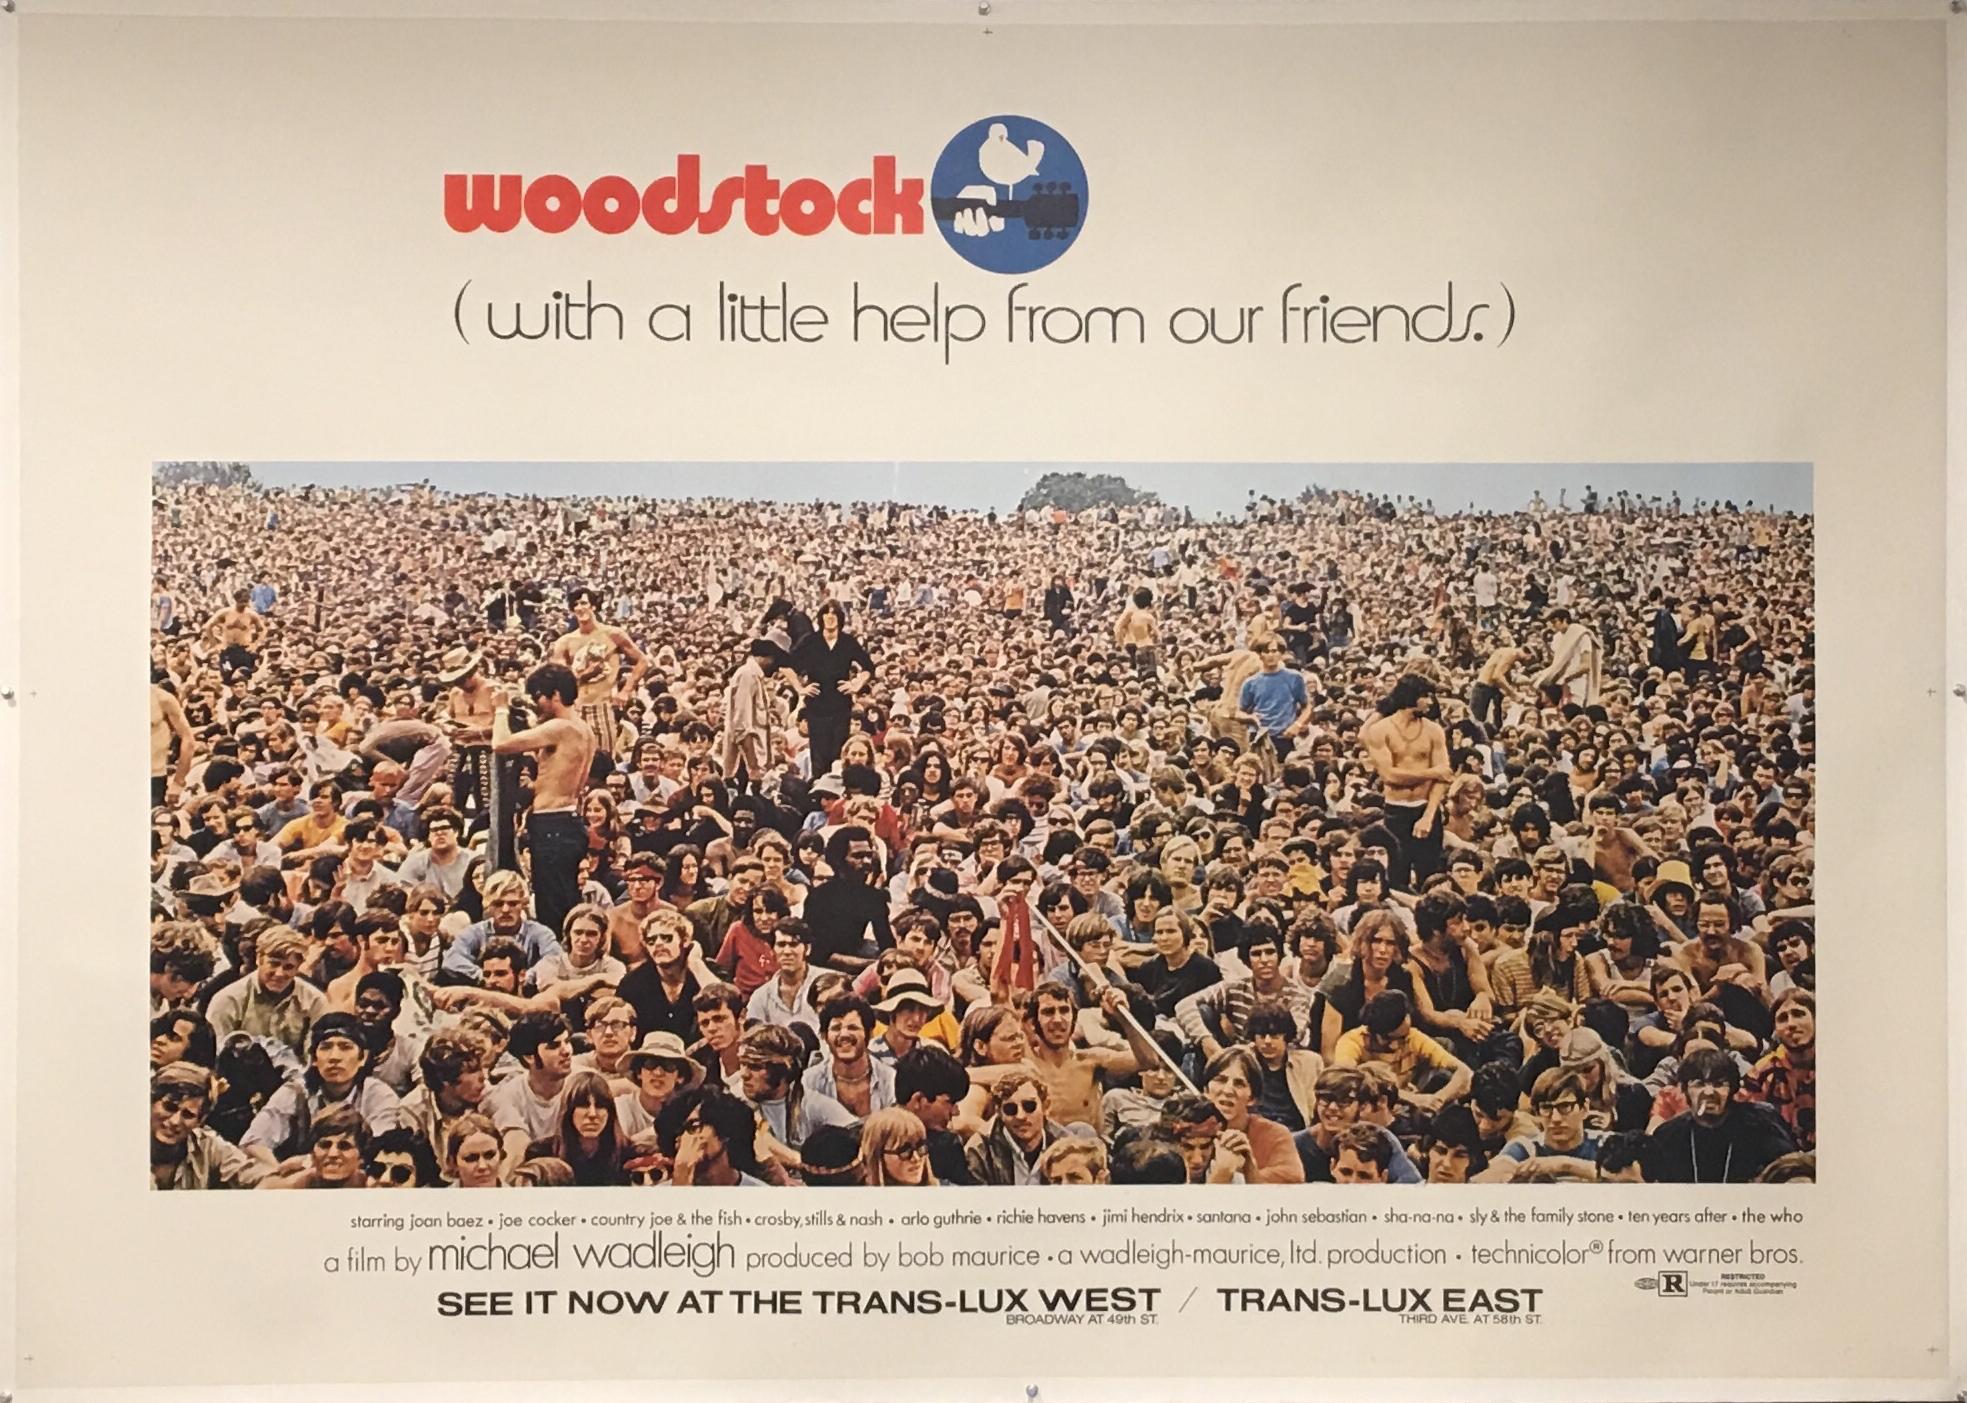 Unknown Landscape Print - WOODSTOCK RARE FILM POSTER - CROWD SCENE - 50 YEARS OLD THIS SUMMER  